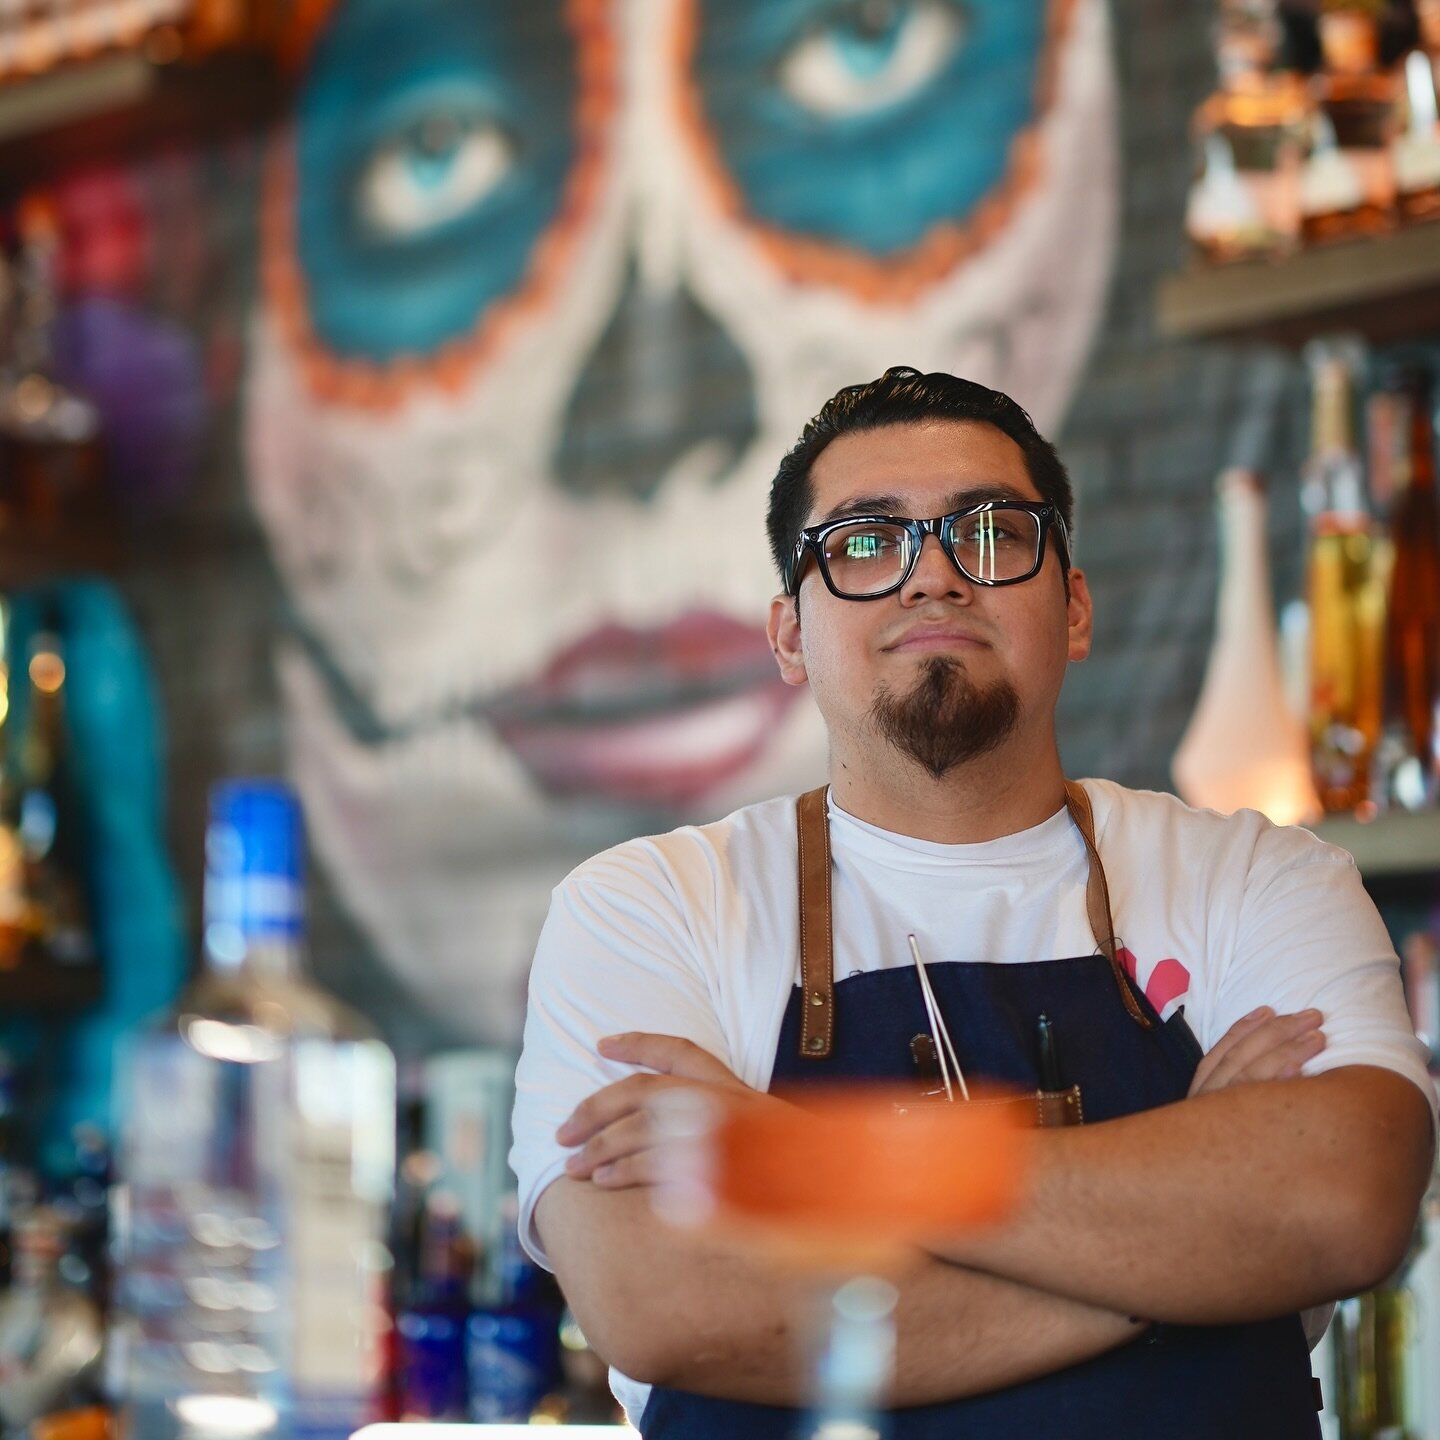 10 years in the mixologist scene, @agave_vicc joined this spectacular team at Mexi from NYC in November.

His cocktail game is absolutely 💯🔥

#TalkMexiToMe #Meximodo #Cocktails #CocktailPorn #Mixologist #TequilaBar